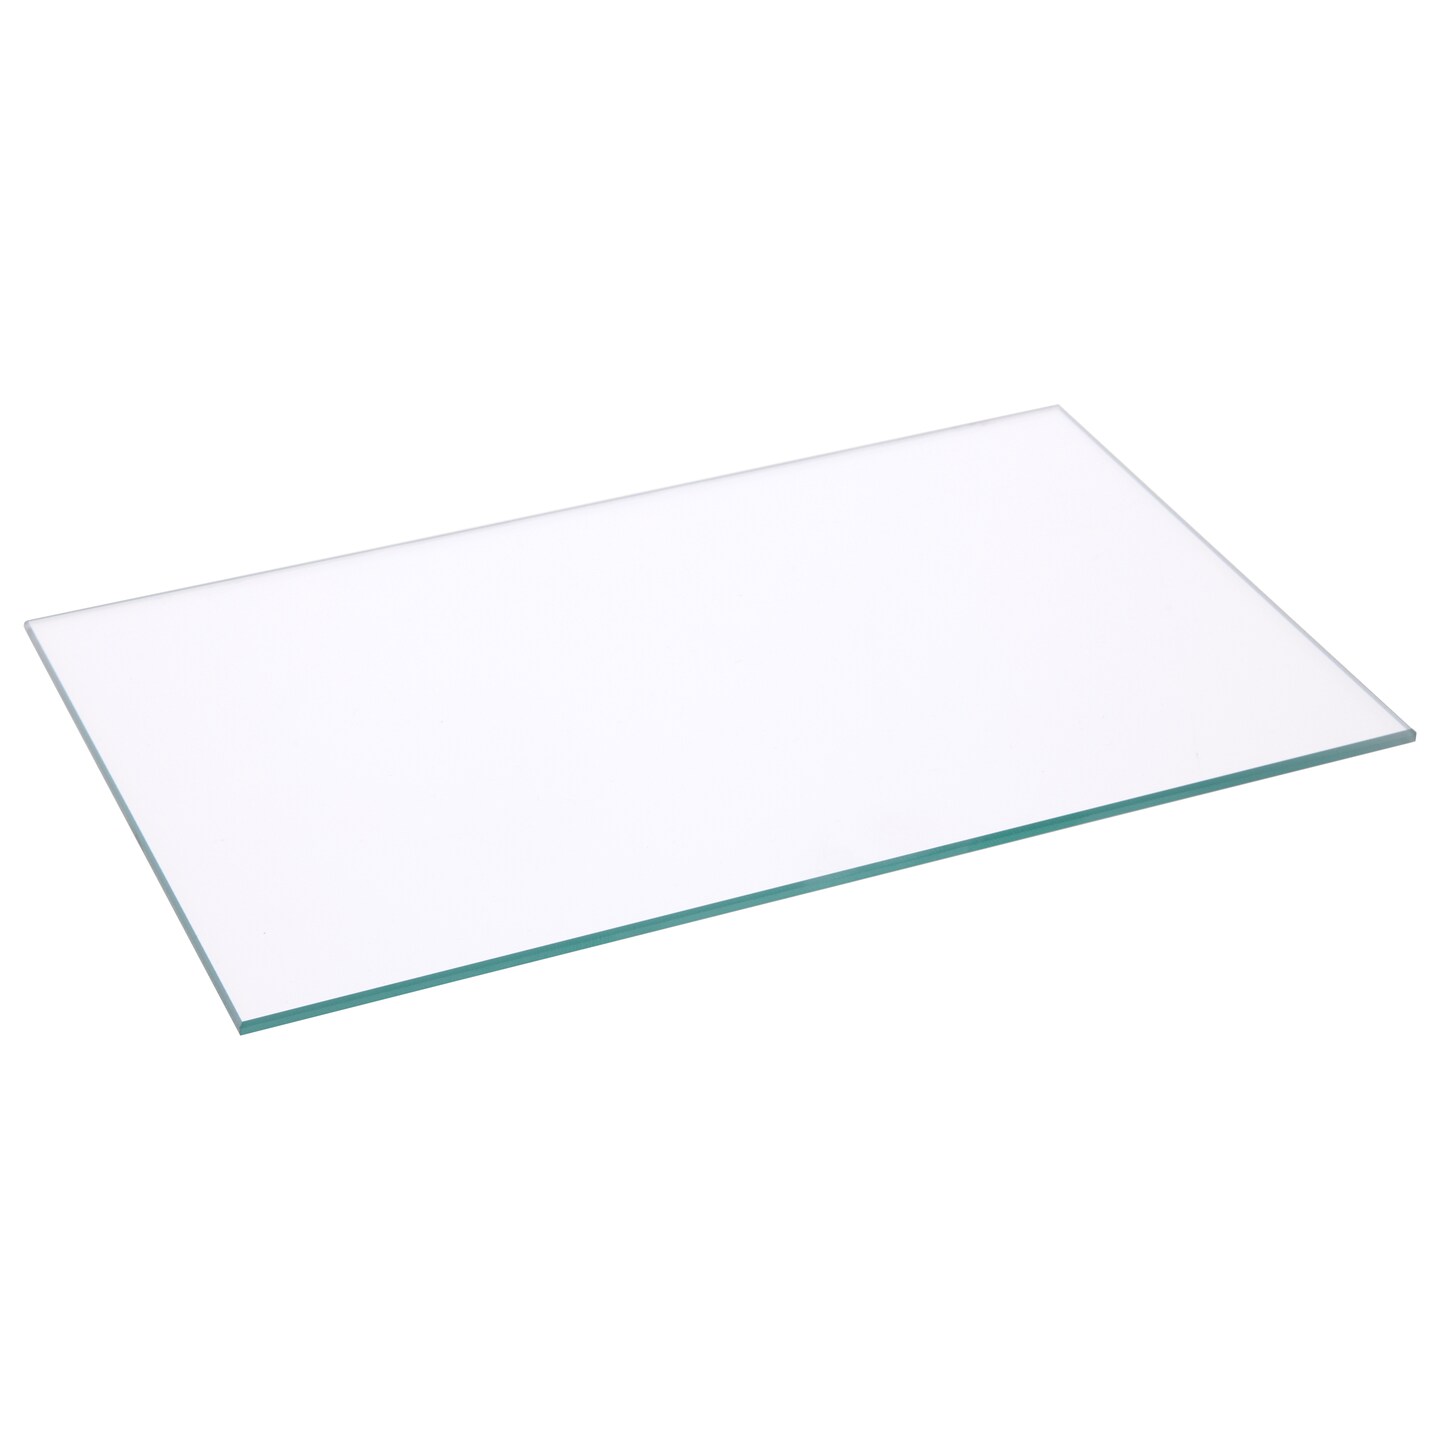 Plymor Rectangle 3mm Non-Beveled Clear Glass, 5 inch x 8 inch